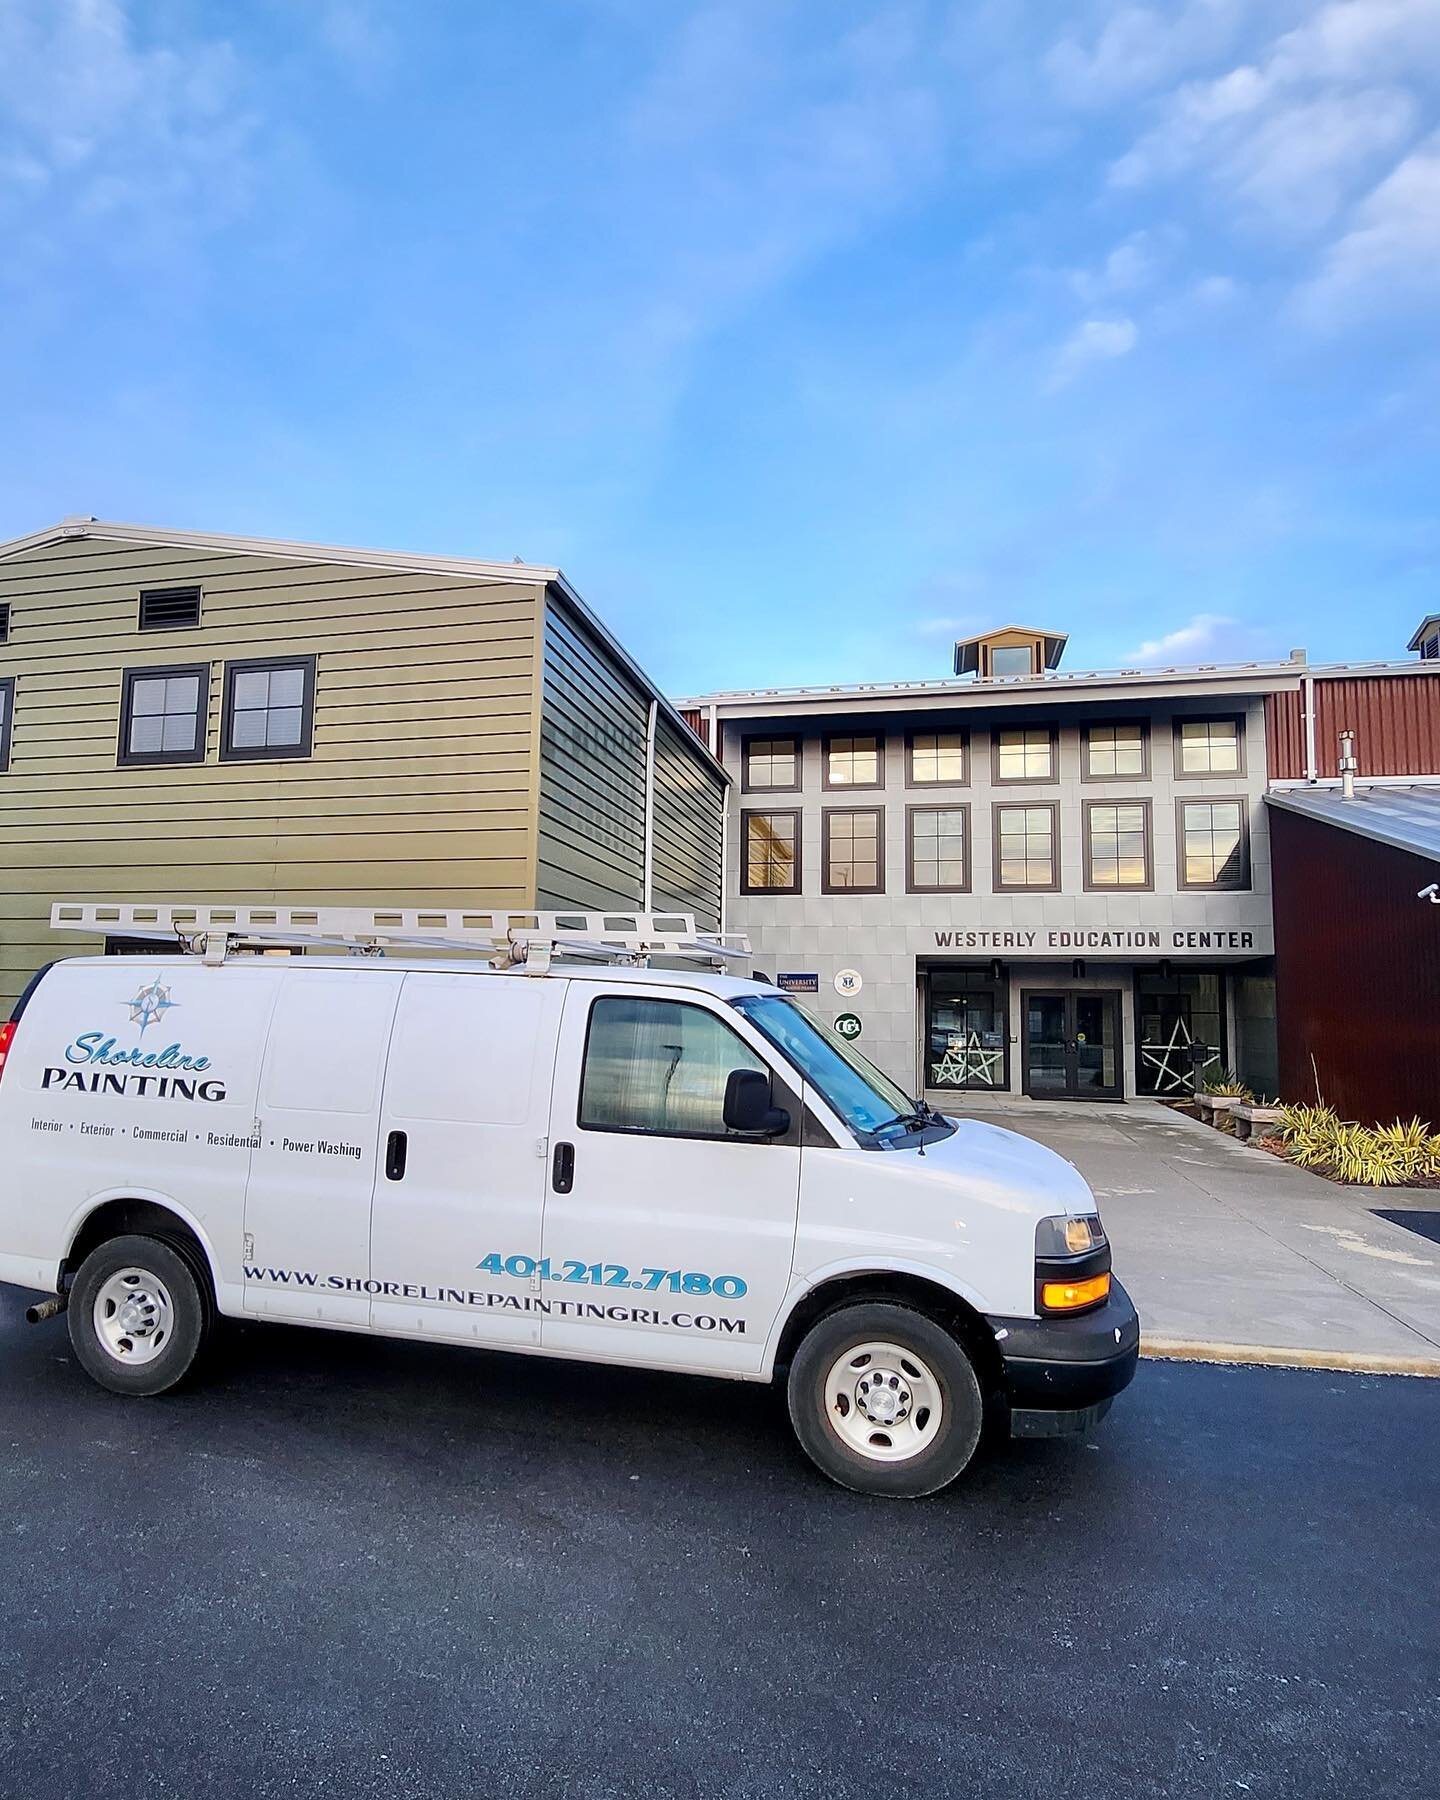 #backagain 

We did some more work for our friends at the Westerly Education Center to start off 2023🙌🏽

The facilities look great guys, thank you for having us! Visit the link below for more info about the classes and training programs the Westerl